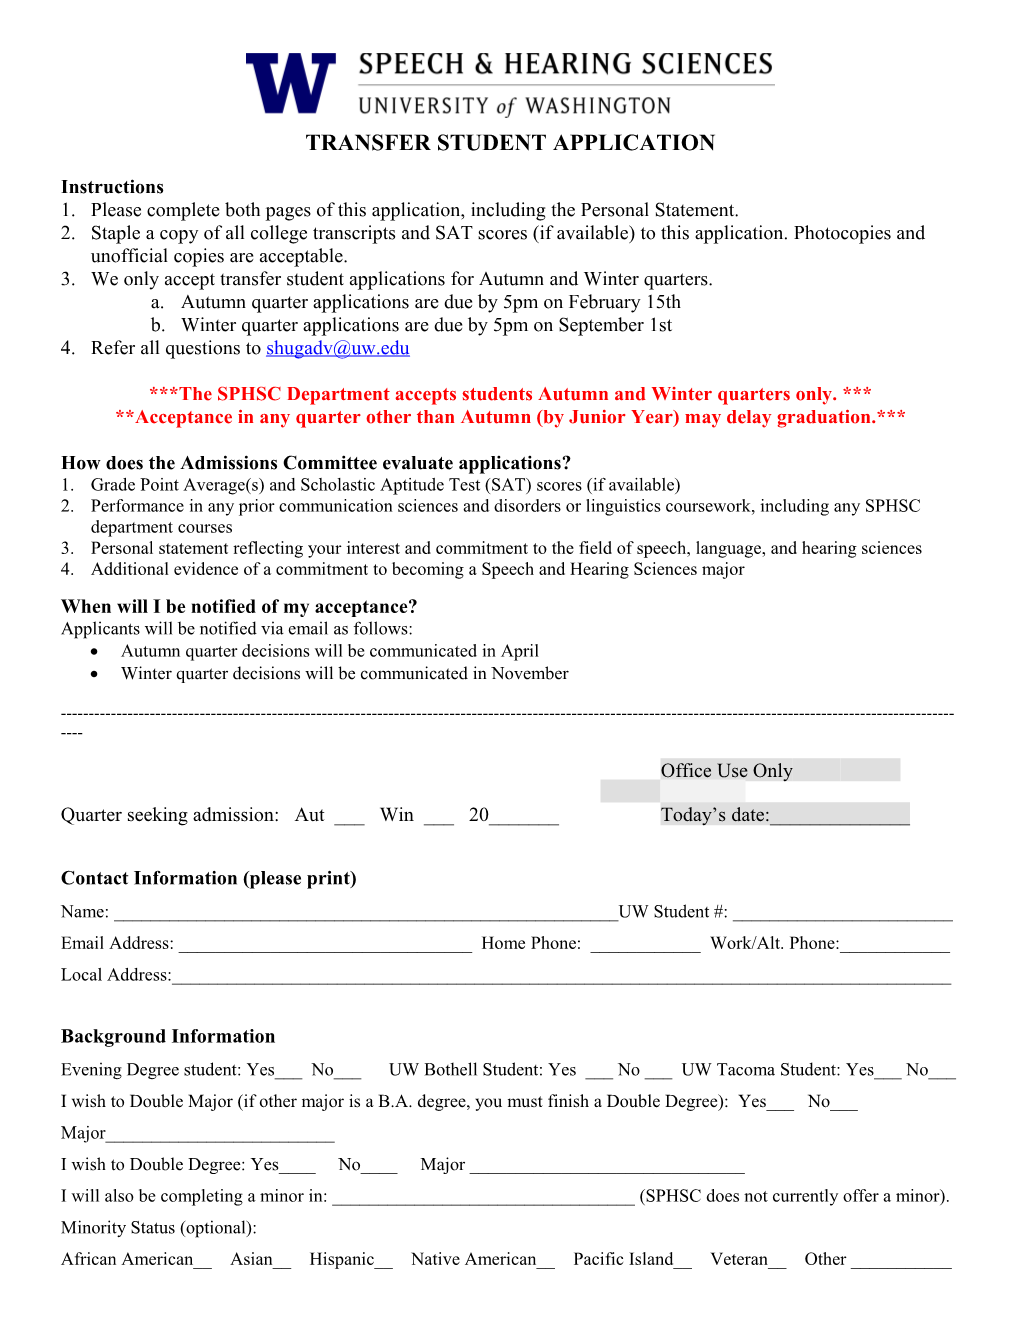 Undergraduate* Admission Application Form for the Department of Speech and Hearing Sciences